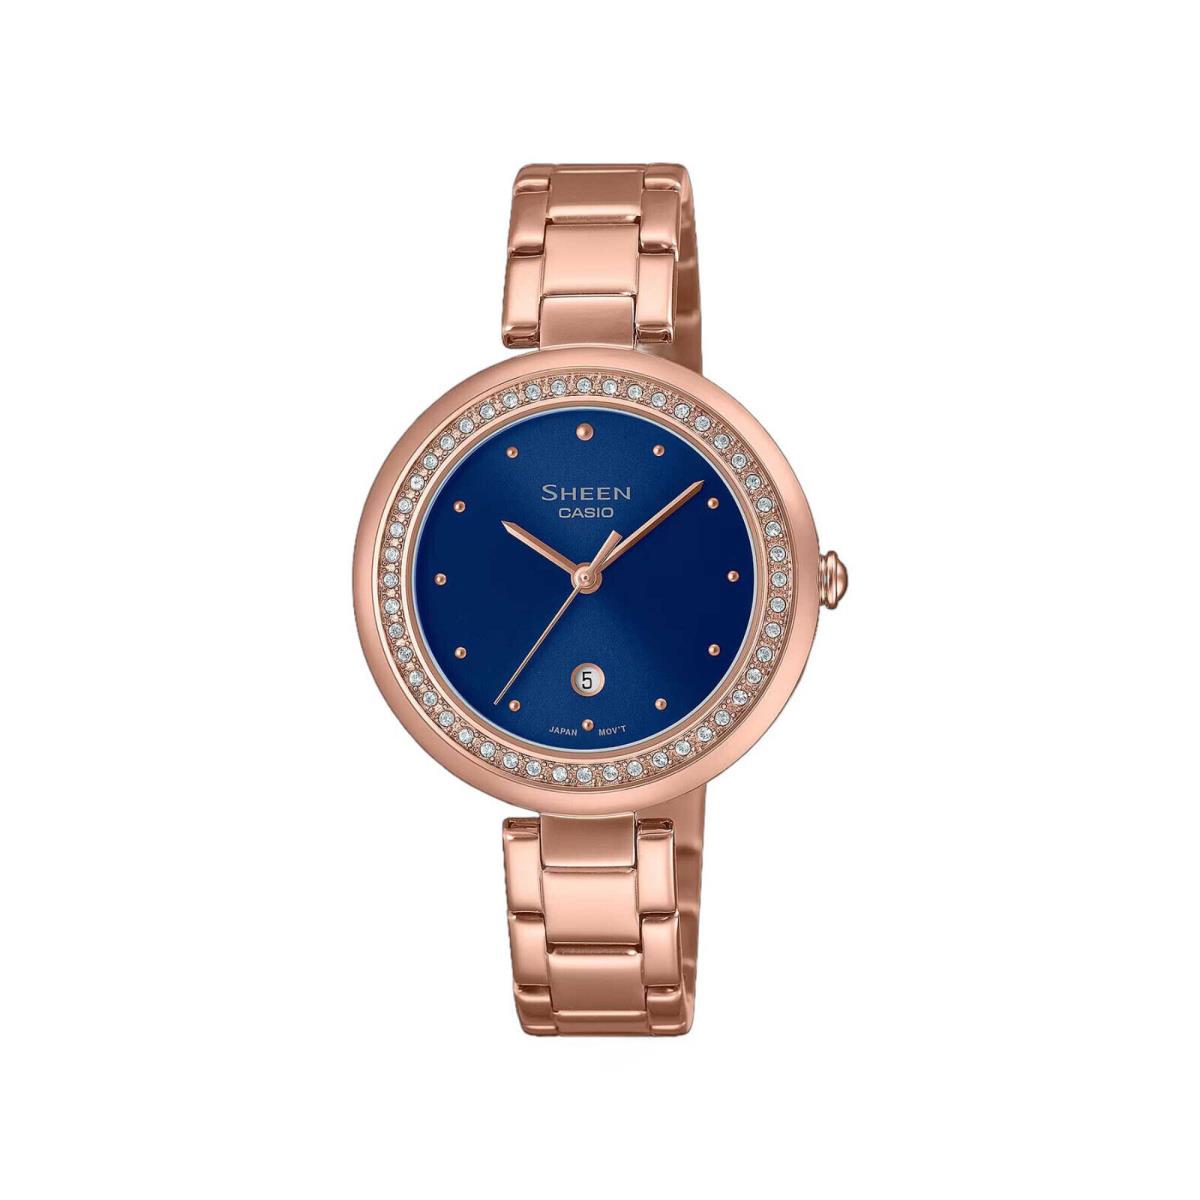 Sheen Casio Ladies Watch Pink Gold Blue Dial Crystals Analog In Gift Box - Blue, Gold, Pink